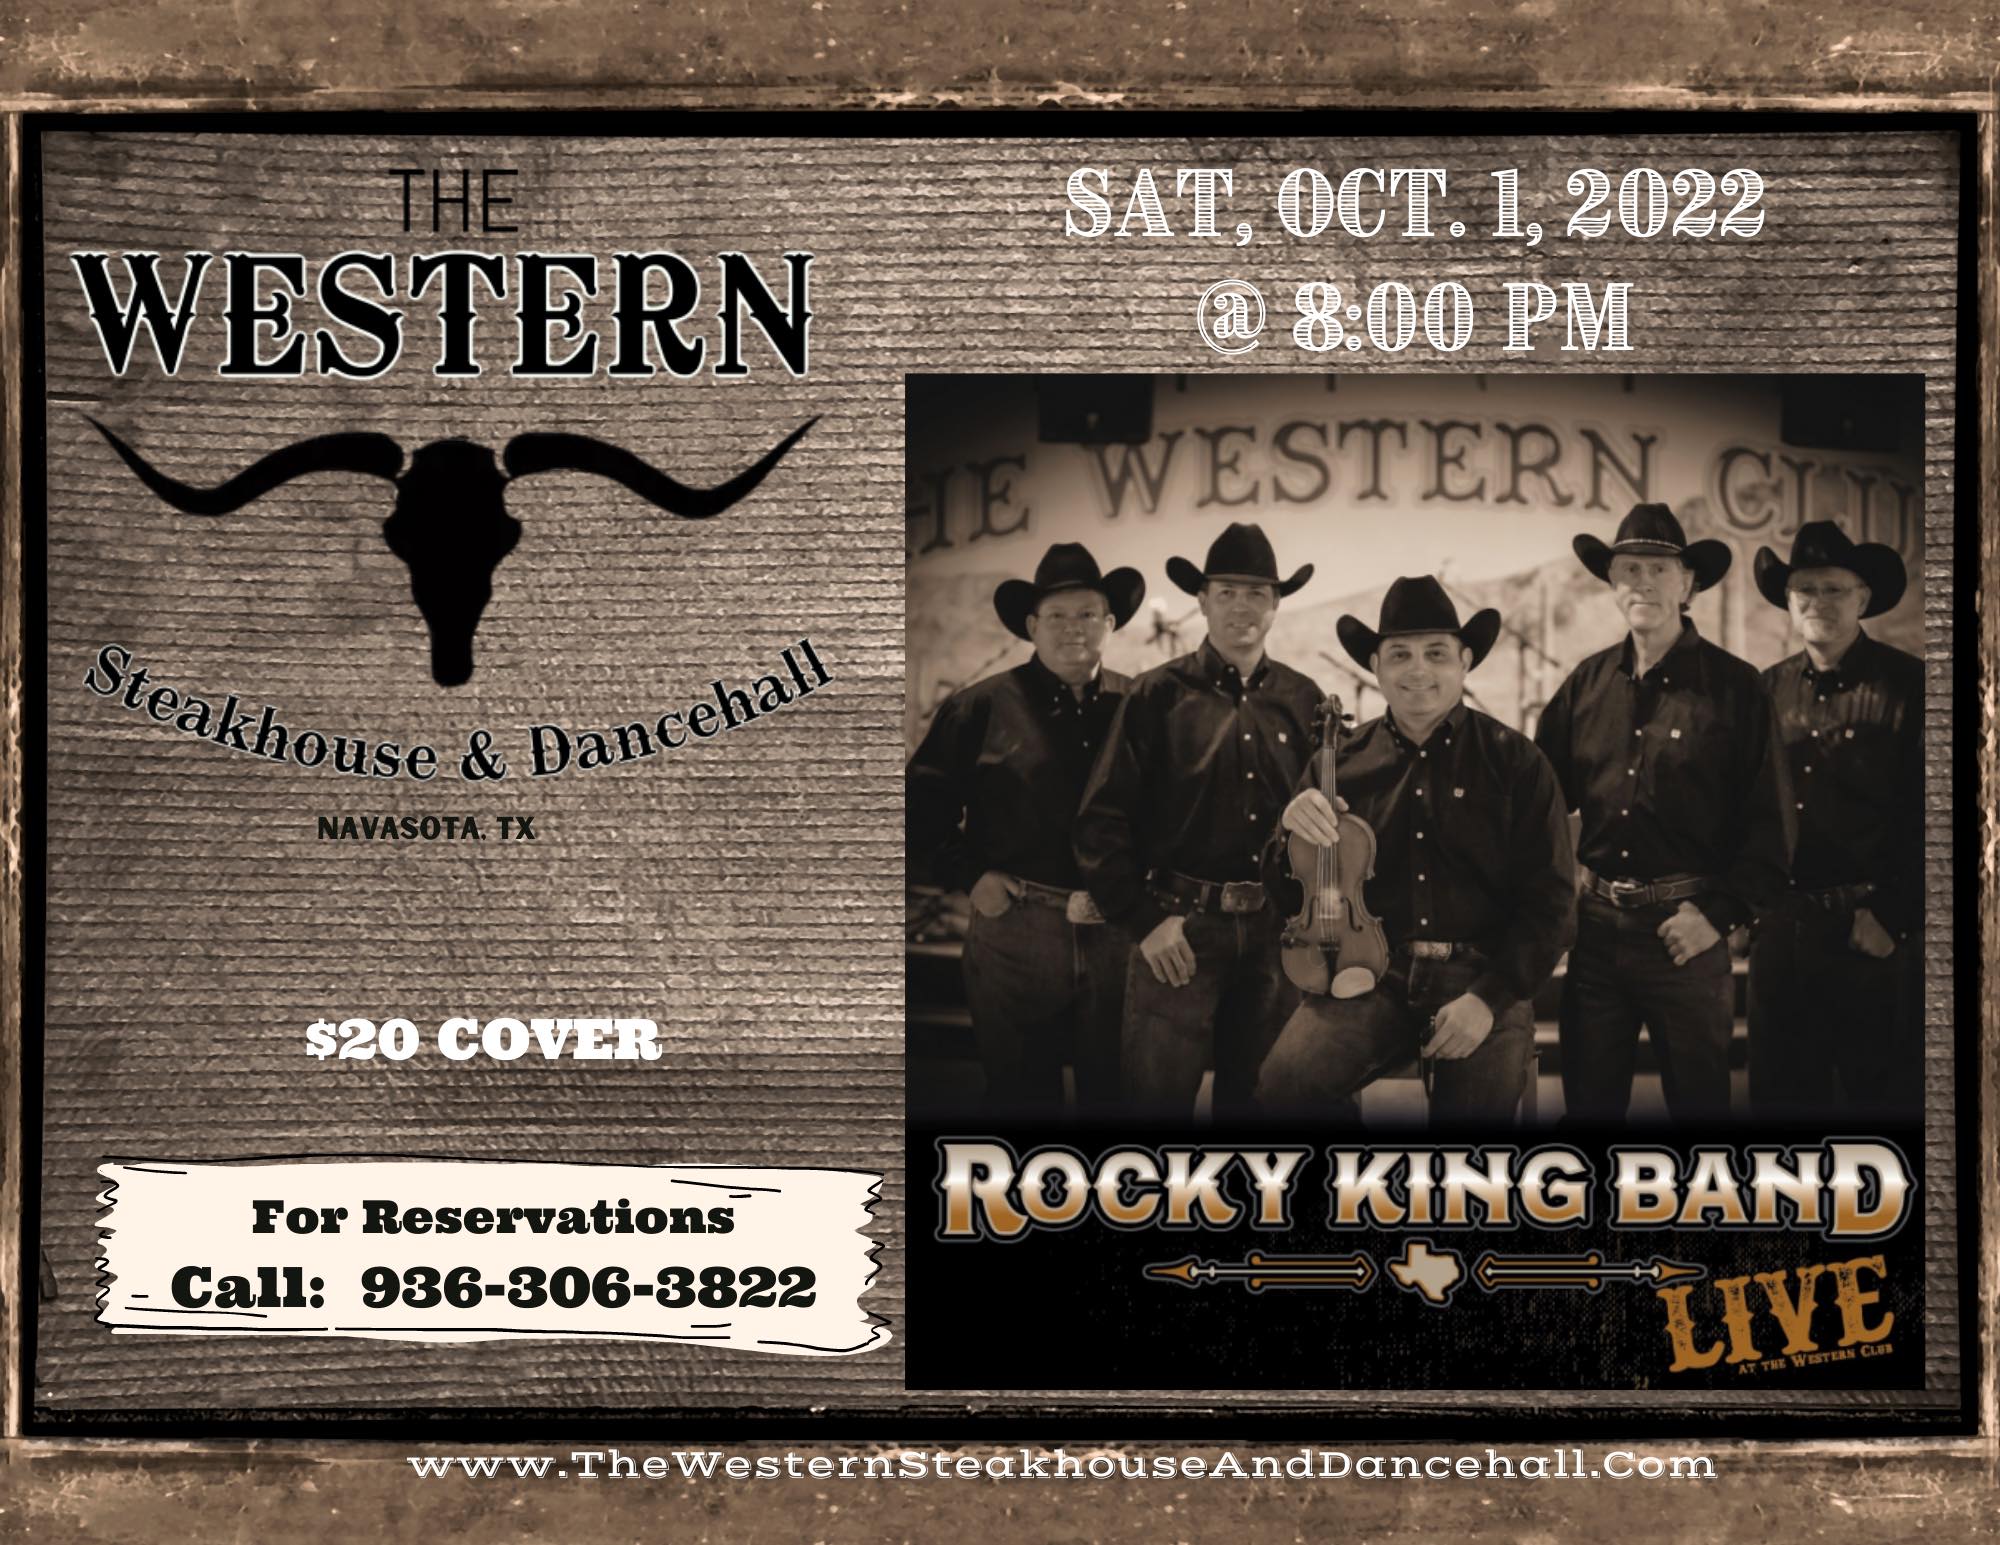 Rocky King Band at The Western Steakhouse & Dancehall - BCS | Calendar